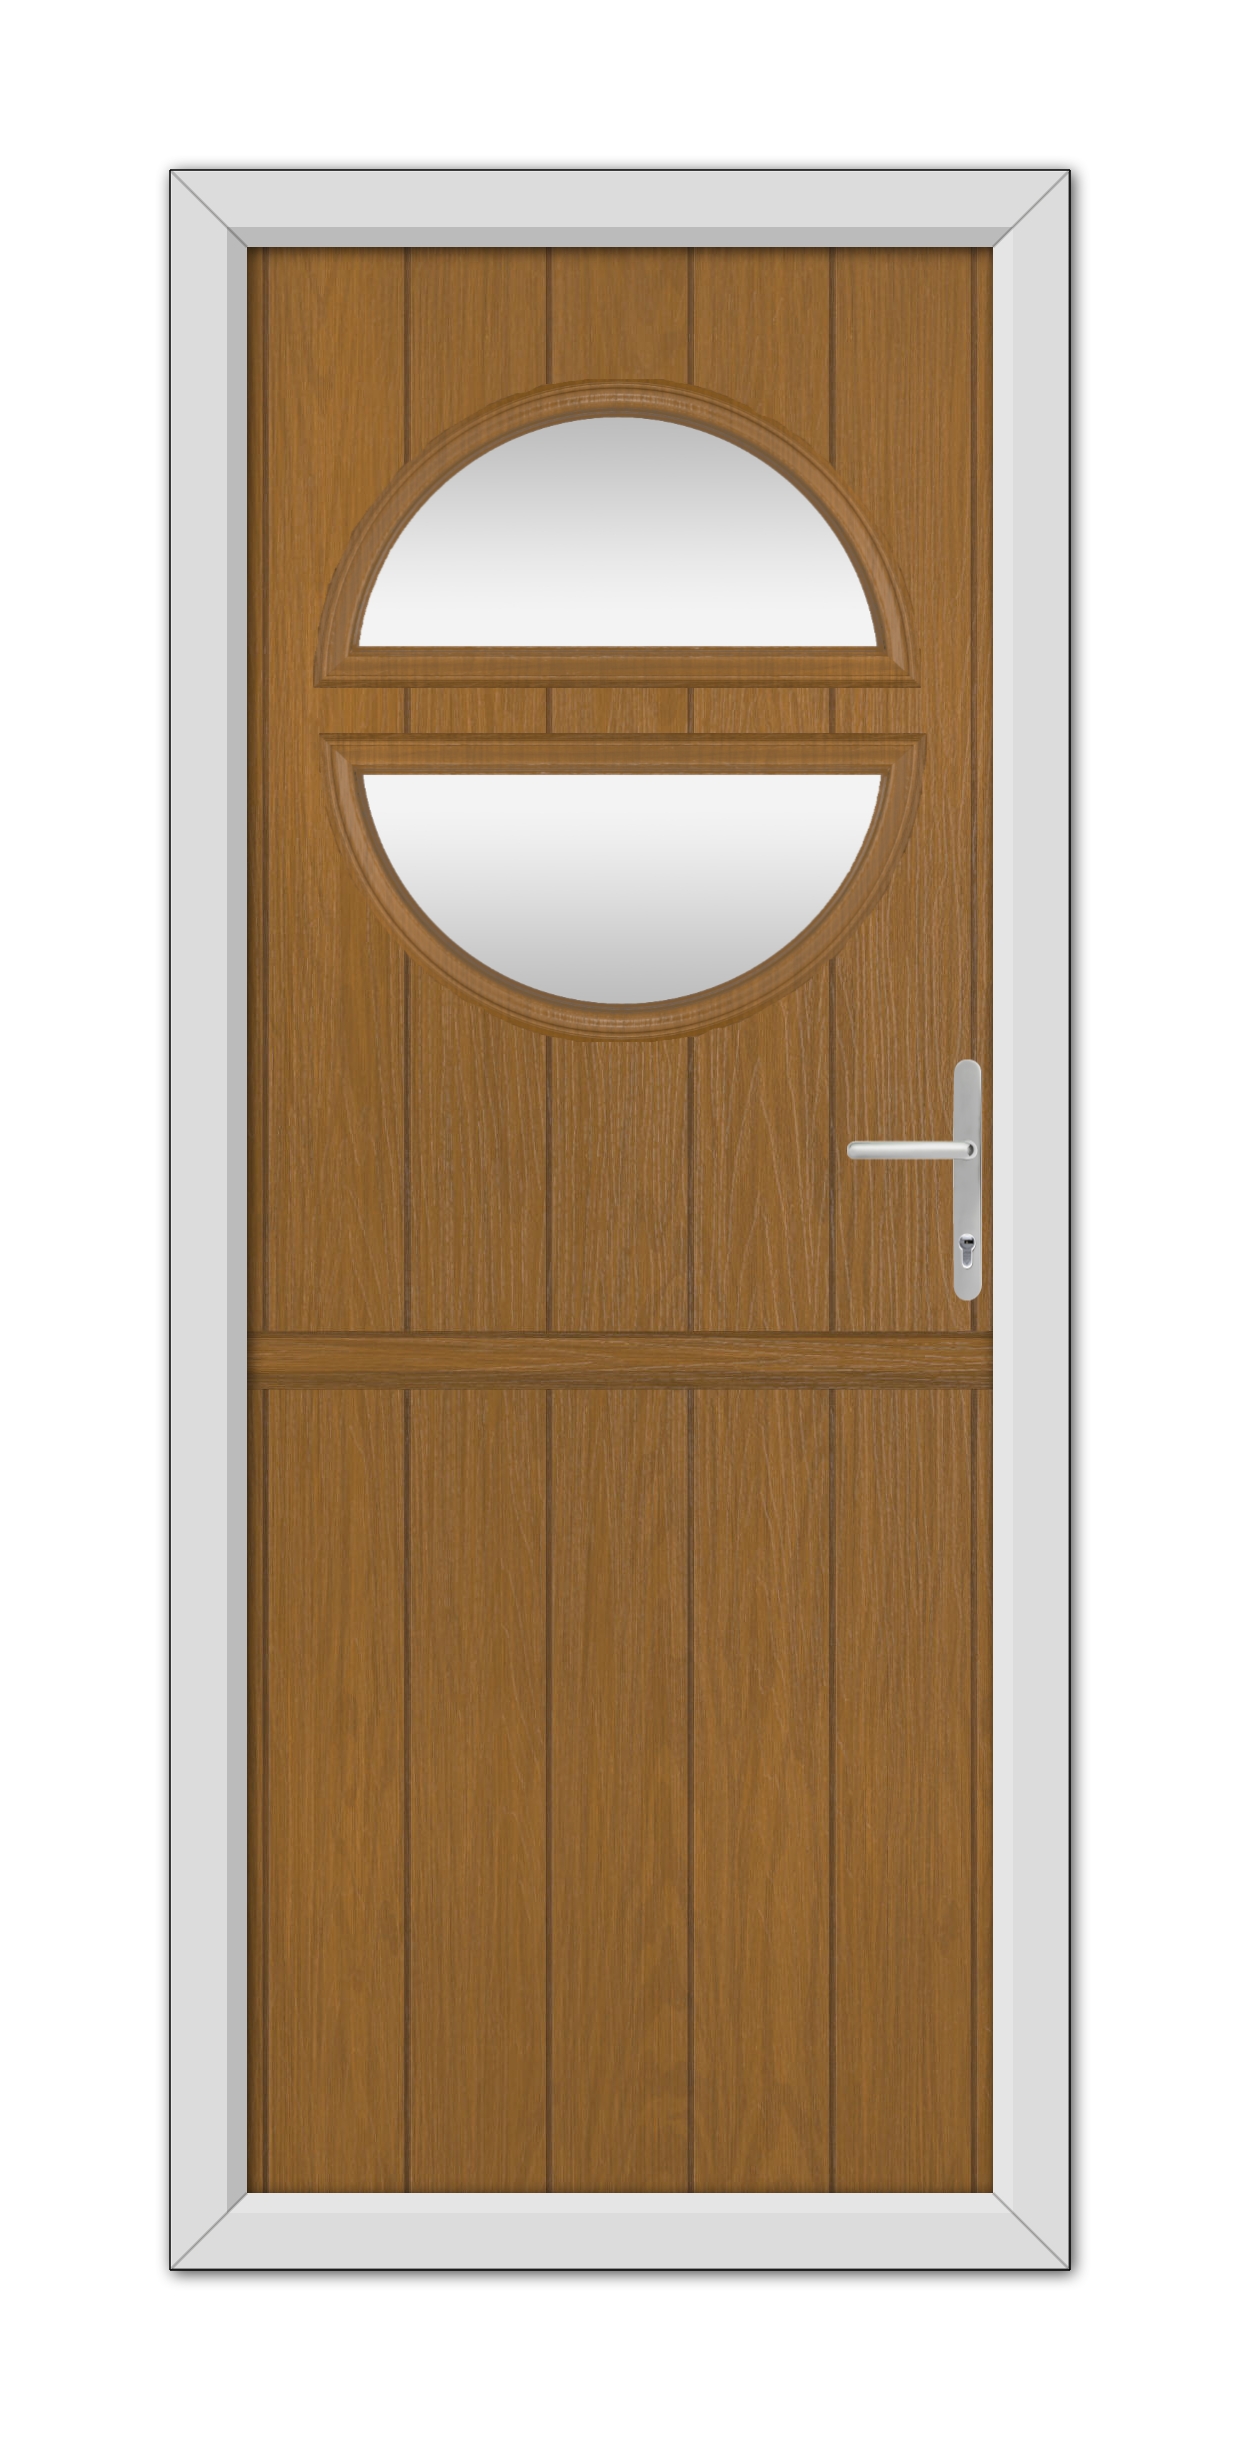 A Oak Kent Stable Composite Door 48mm Timber Core with a half-circle window at the top and a modern handle, framed in white.